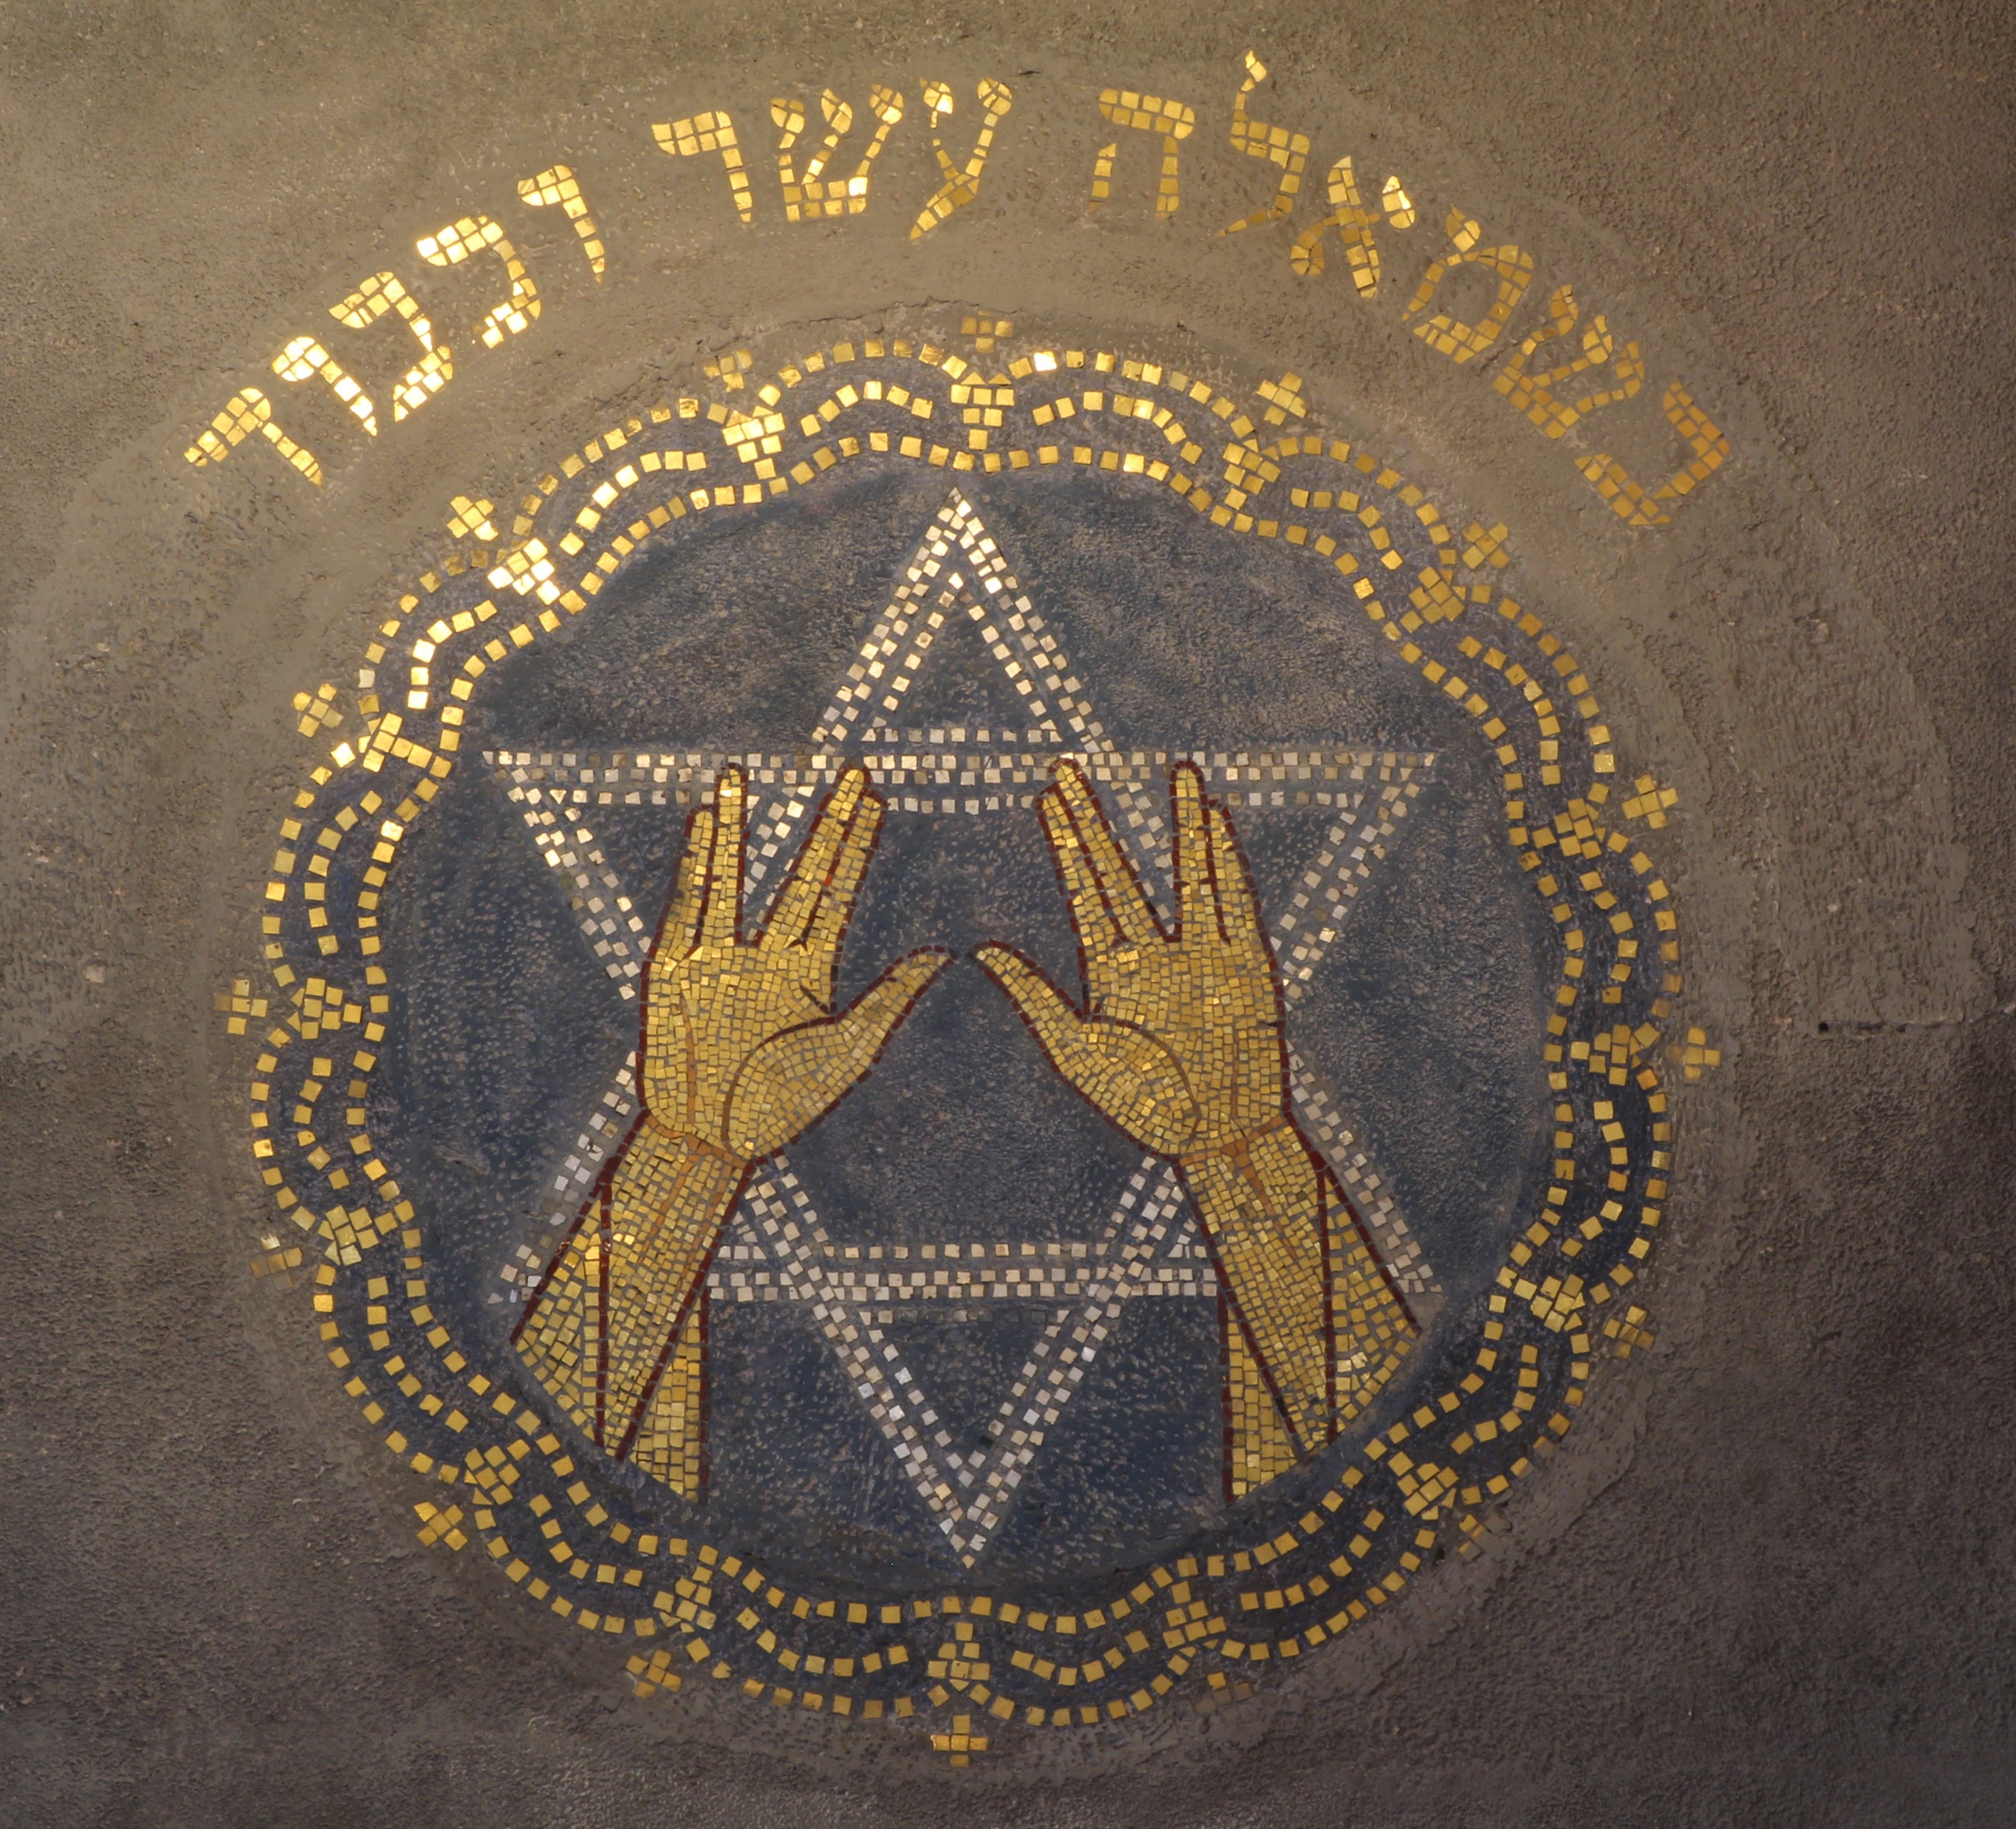 A mosaic depicting the priestly blessing, performed as part of the Yom Kippur Neilah service, which asks God to give the worshippers peace. | <a href="https://commons.wikimedia.org/wiki/File:Synagoge,_Enschede,_Mozaiek.jpg#/media/File:Synagoge,_Enschede,_Mozaiek.jpg">Suppled</a> by <a href="//commons.wikimedia.org/wiki/User:Kleuske" title="User:Kleuske">Kleuske</a> <a href="http://creativecommons.org/licenses/by-sa/3.0" title="Creative Commons Attribution-Share Alike 3.0">[CC BY-SA 3.0]</a>